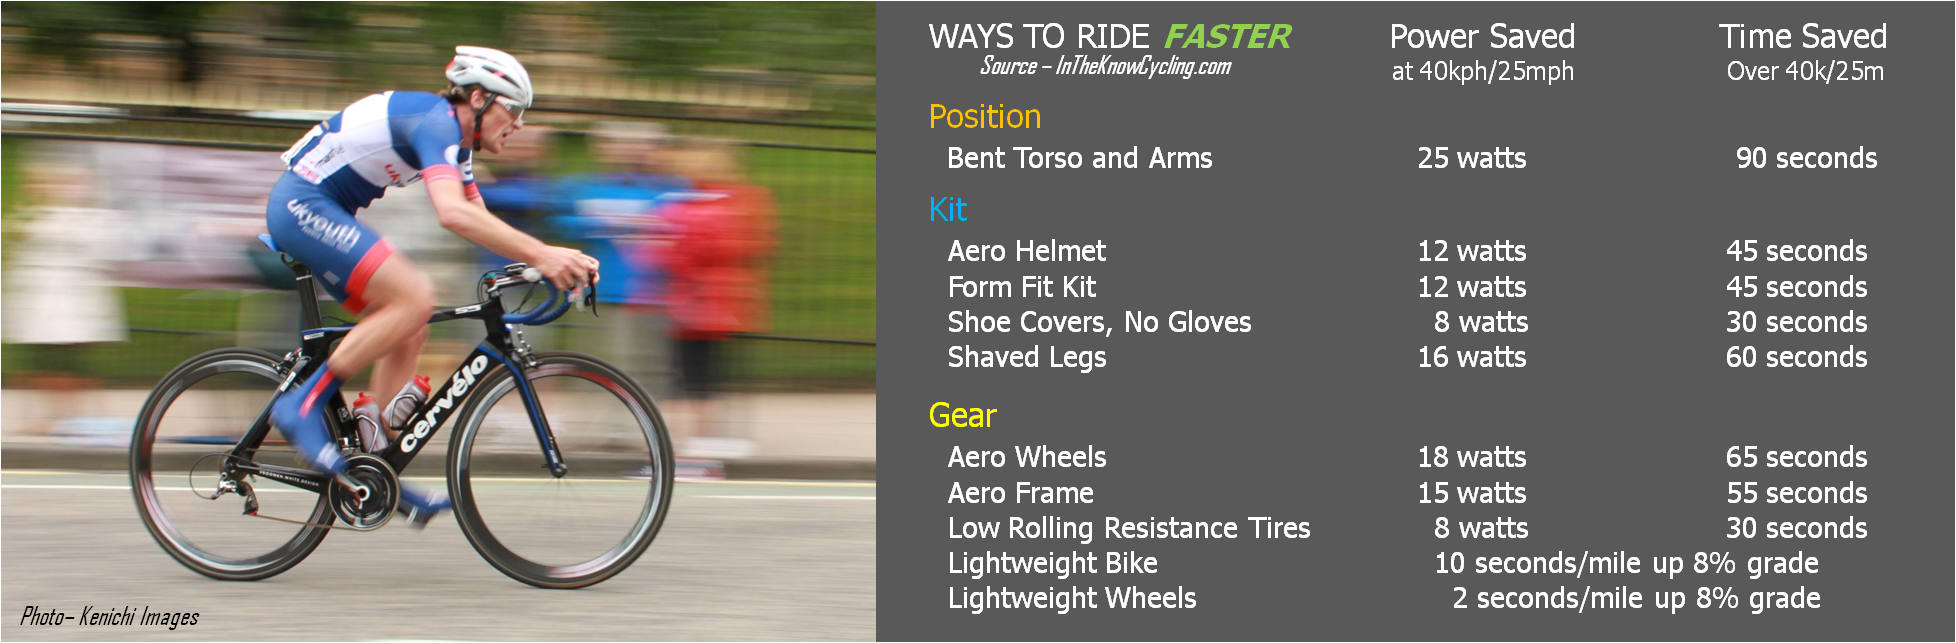 Ways to Ride Faster